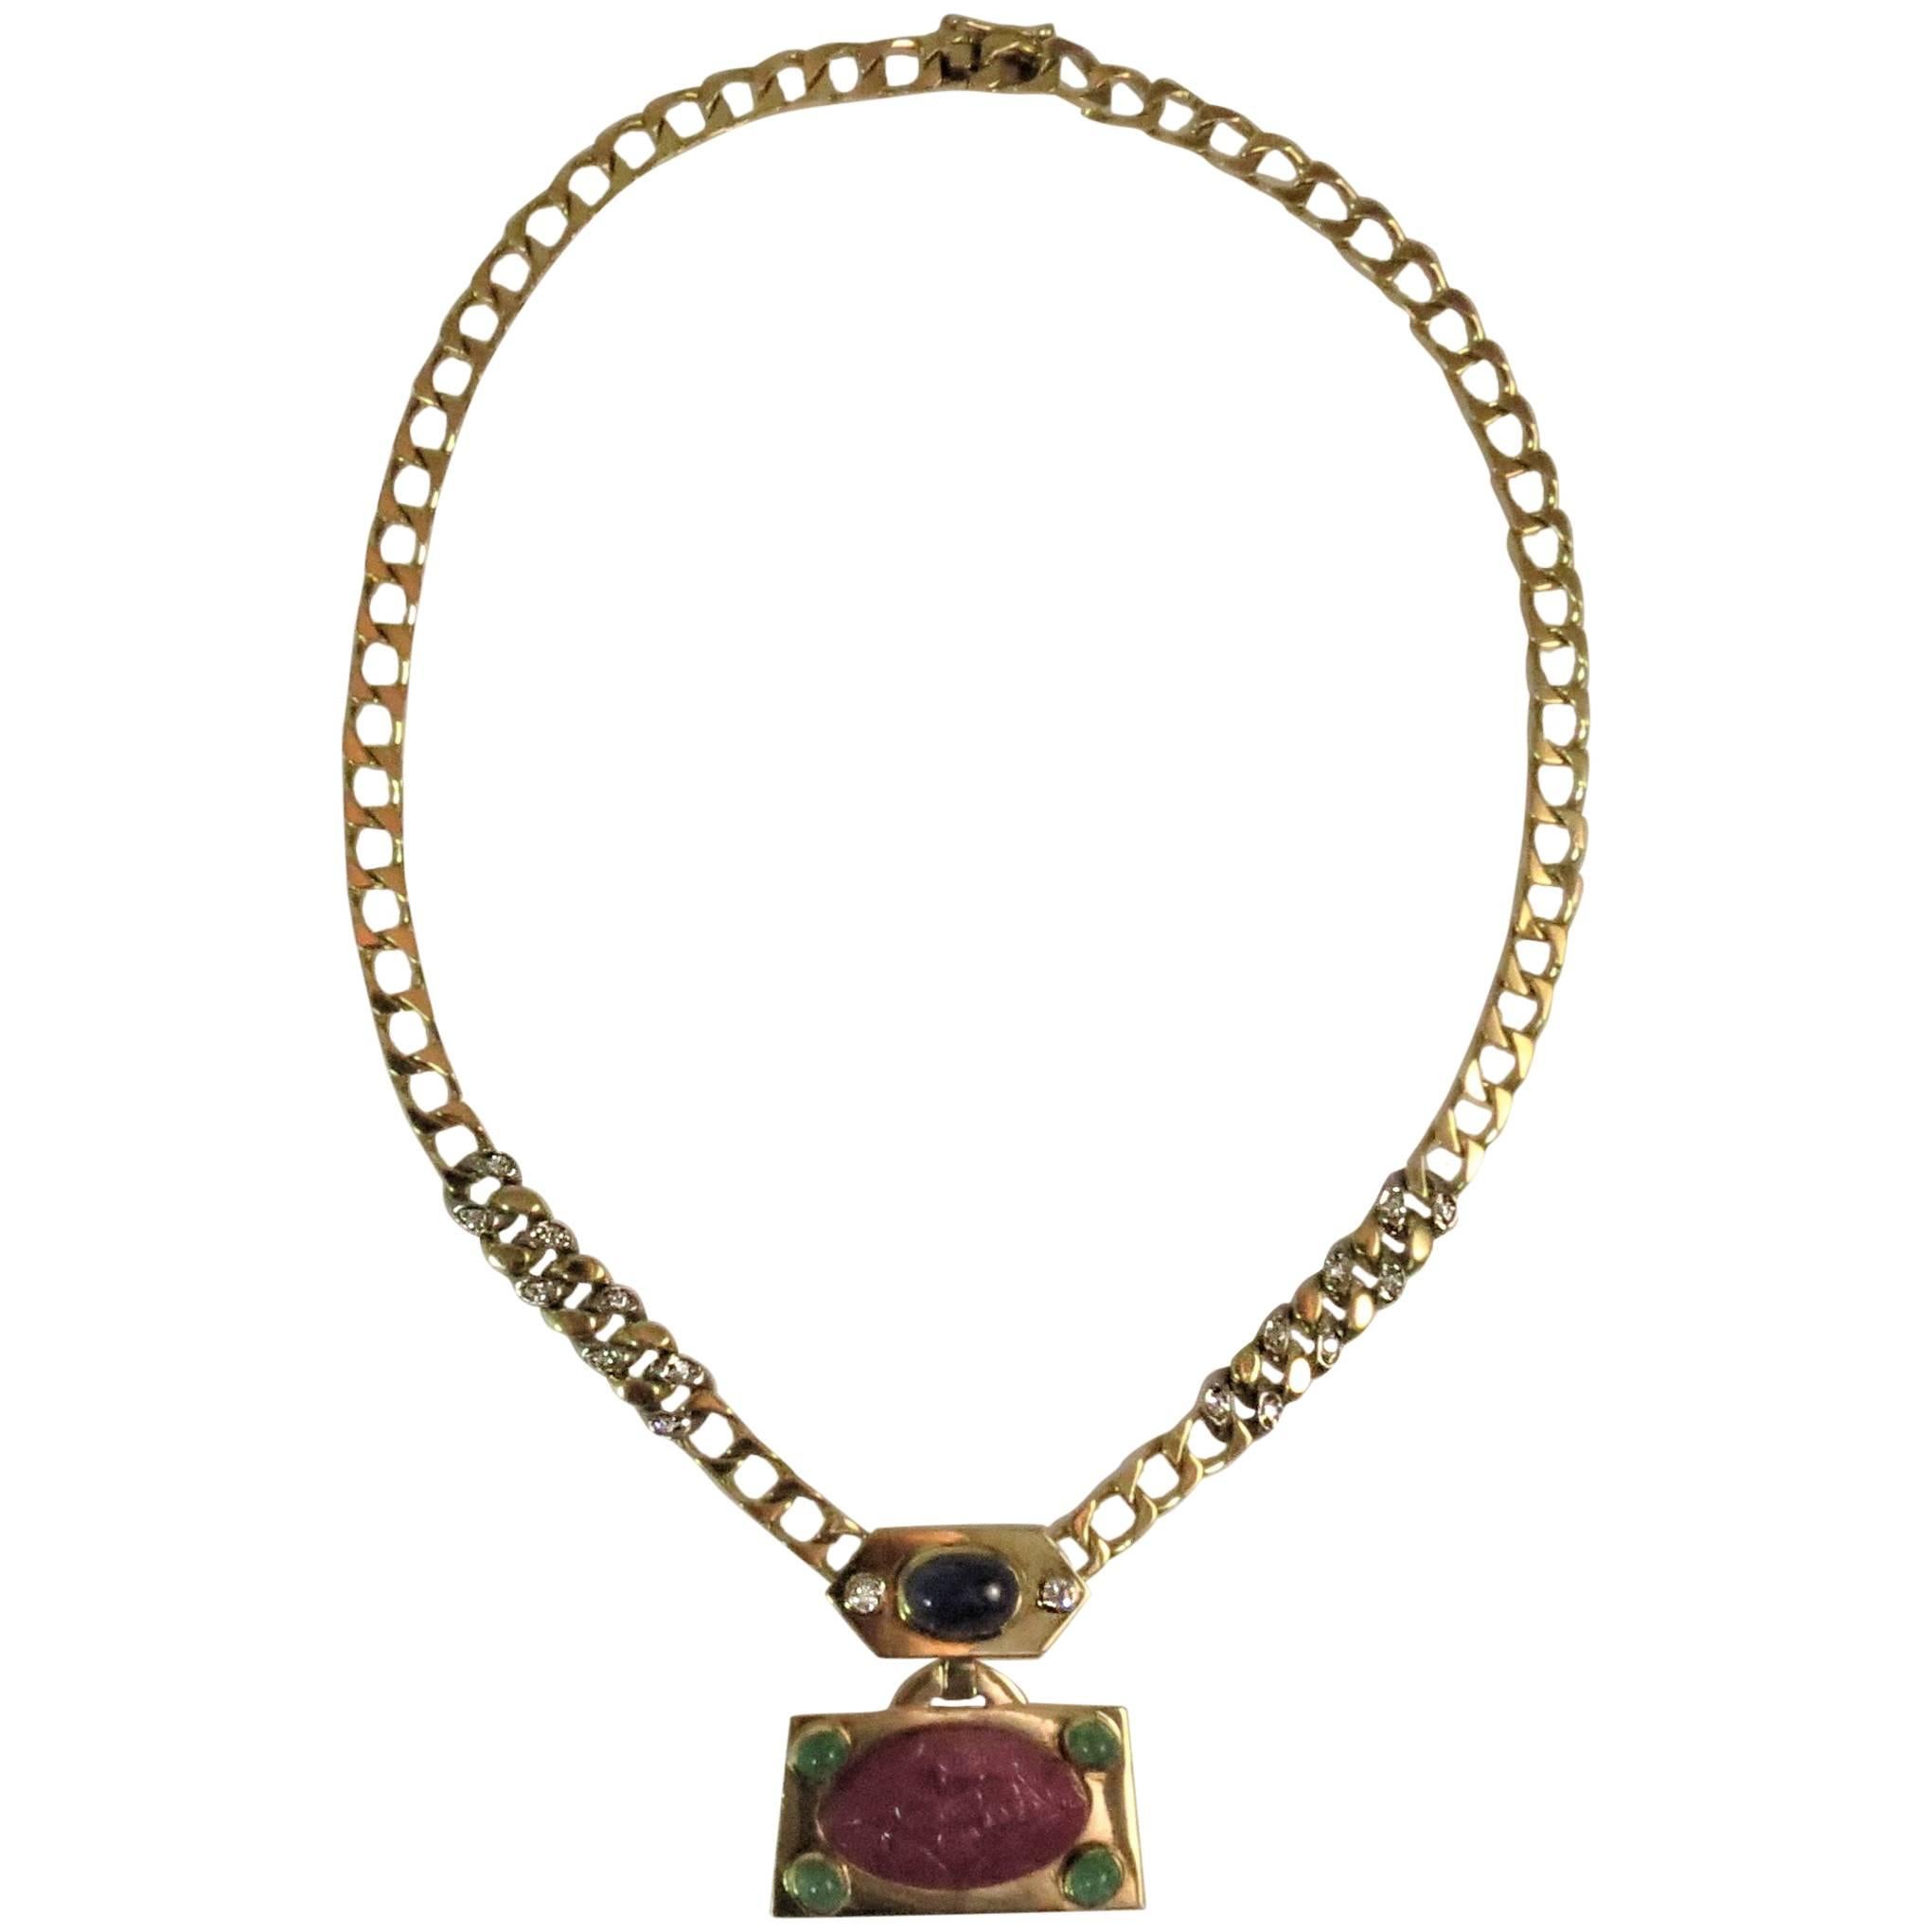 18 Karat Gold Necklace with Carved Ruby, Diamonds, Cabochon Sapphire, Emeralds